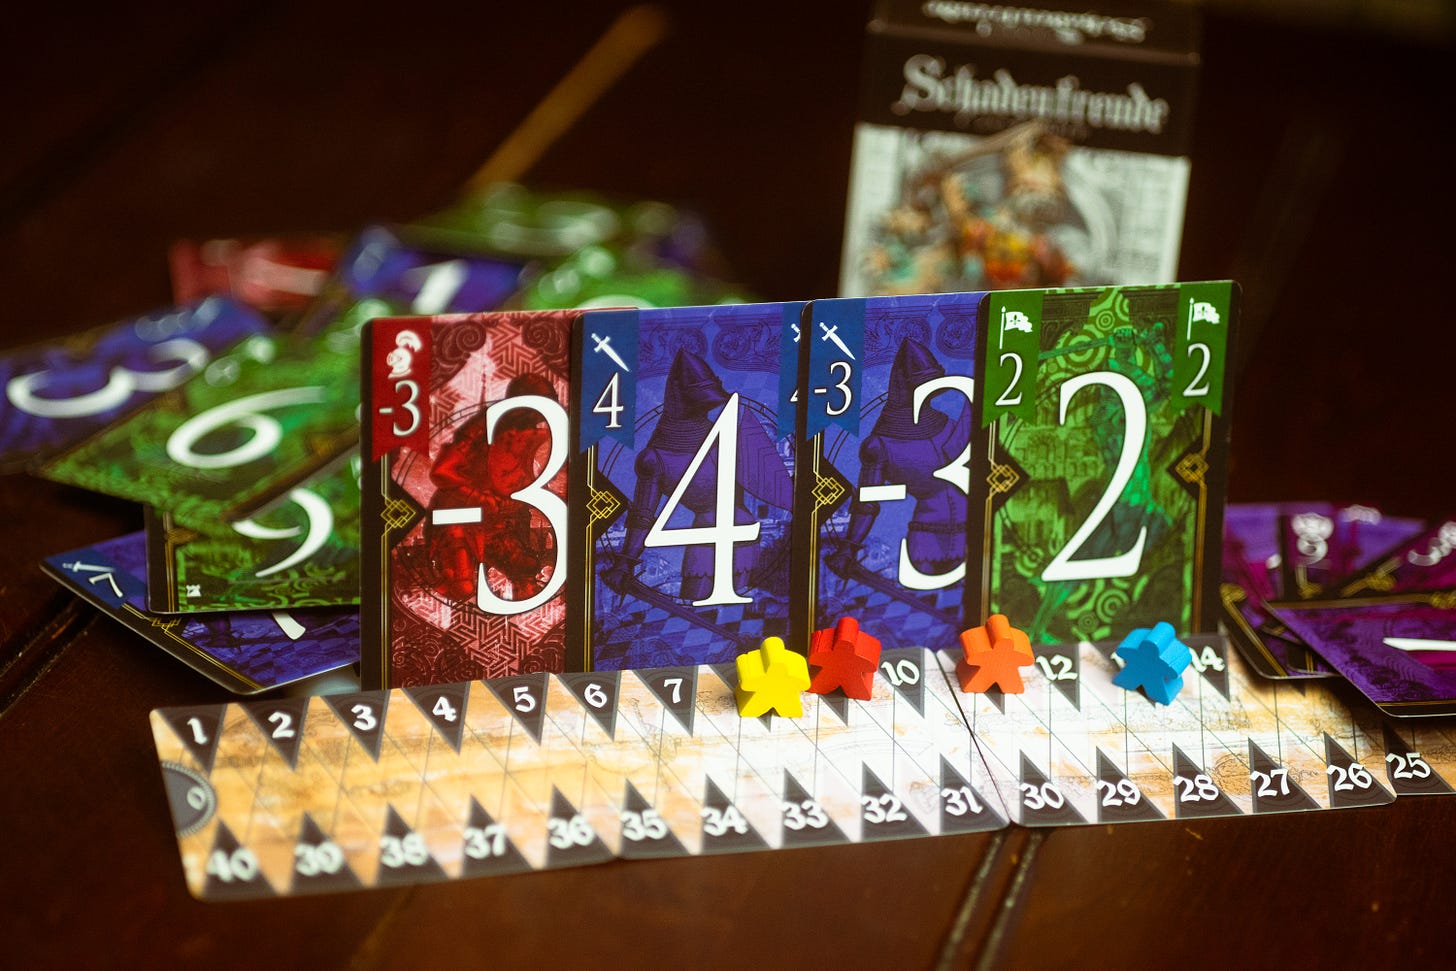 Cards from the game Schadenfreude displayed on a table. A scoring track is in the foreground.